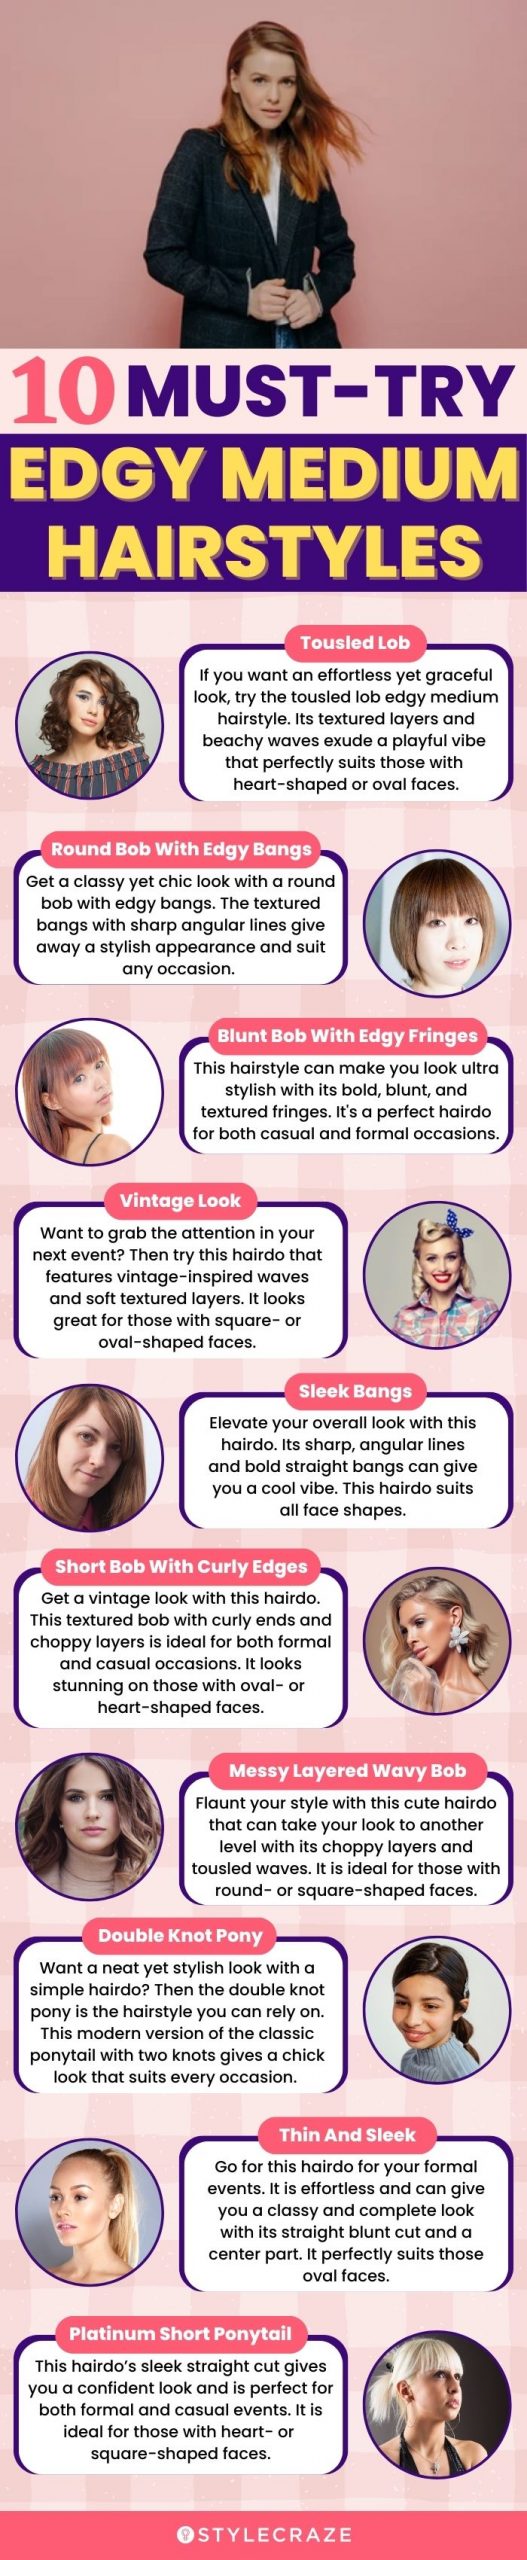 10 must try edgy medium hairstyles (infographic)